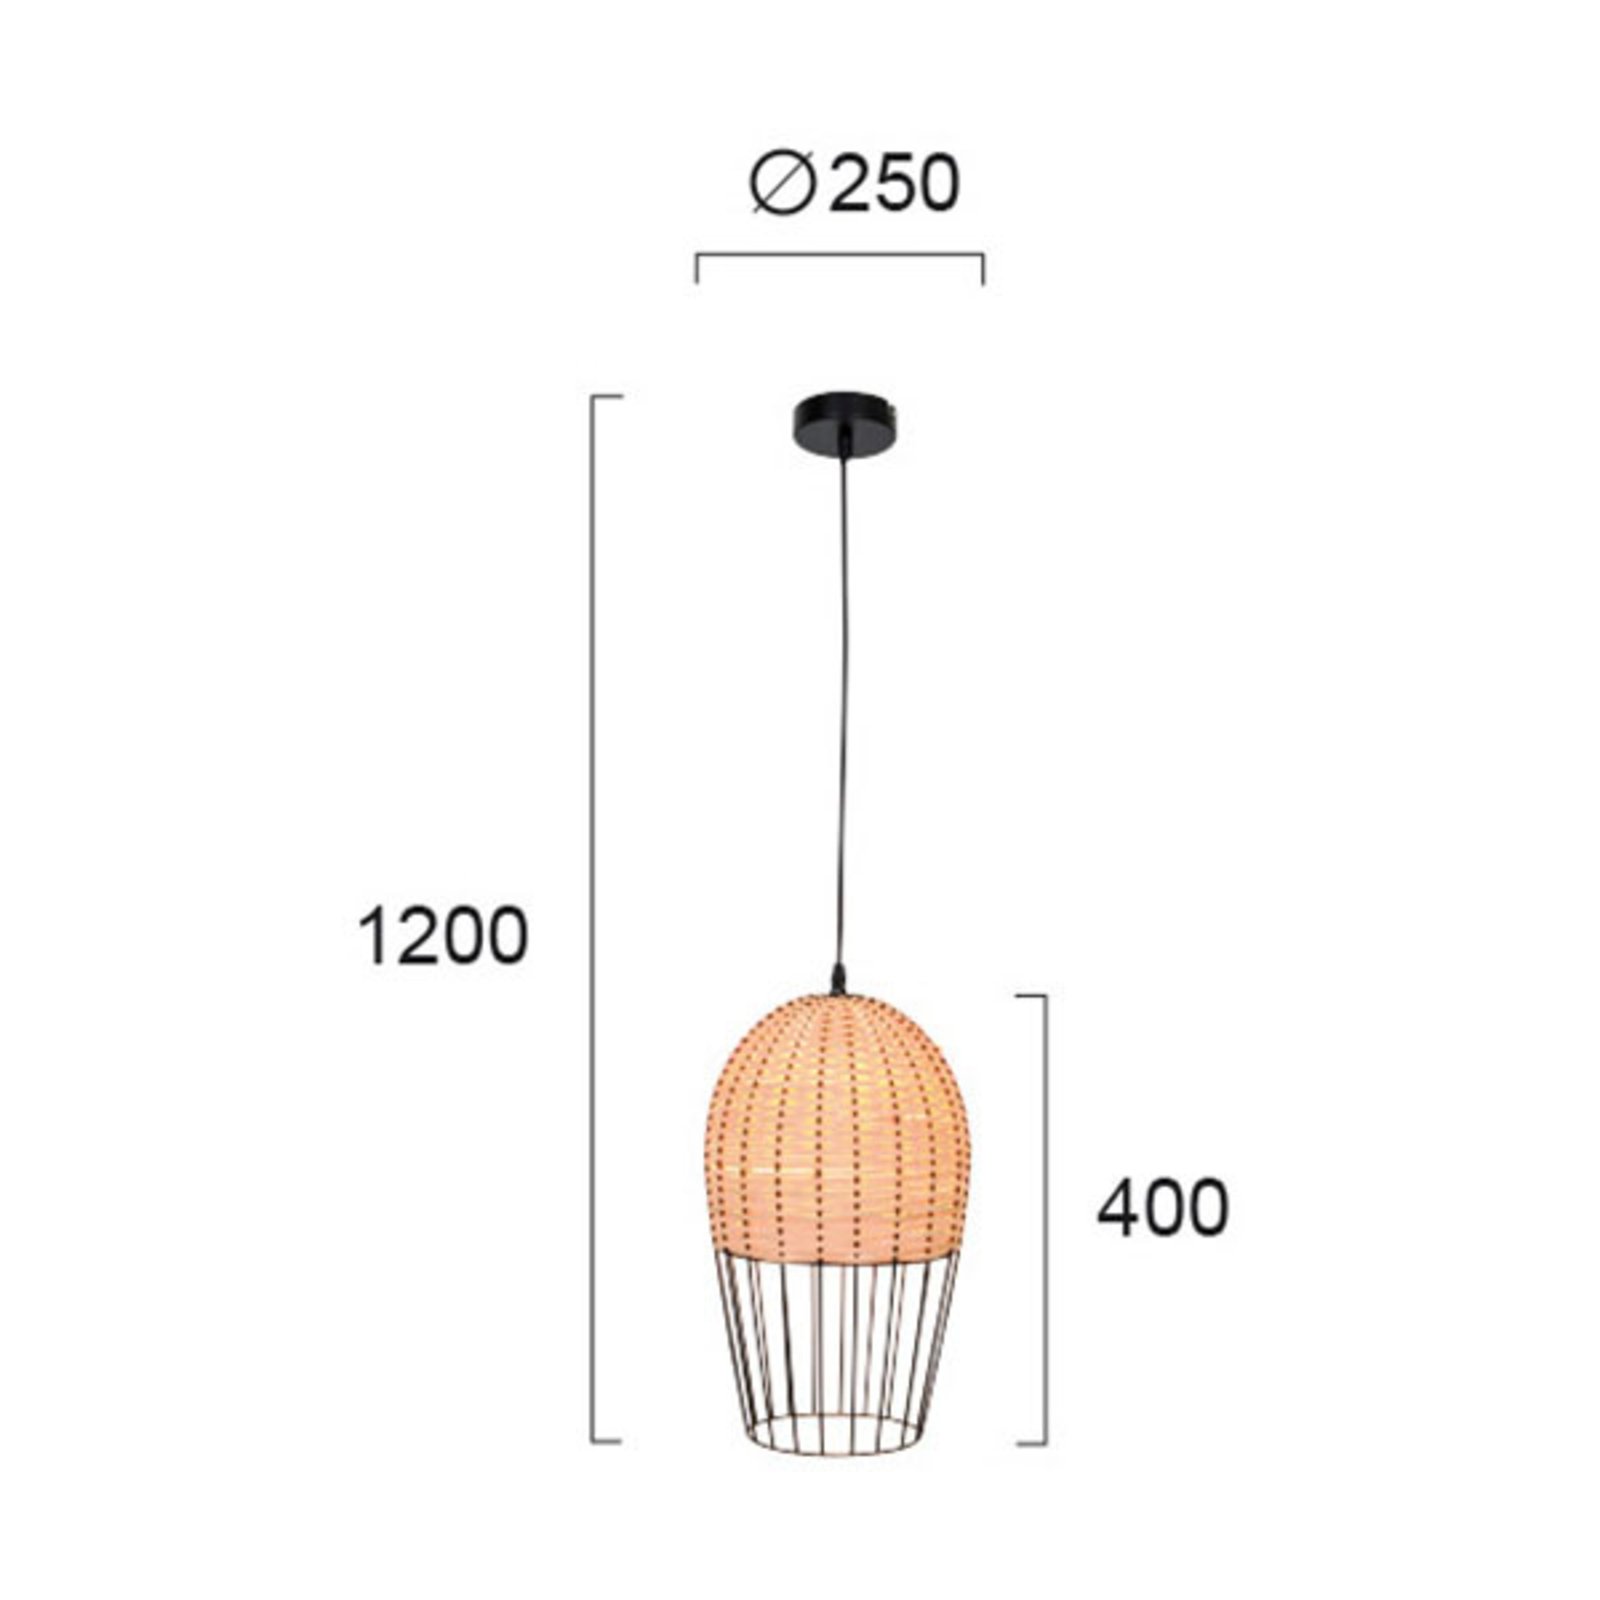 Dizzi hanging light made of wood and metal